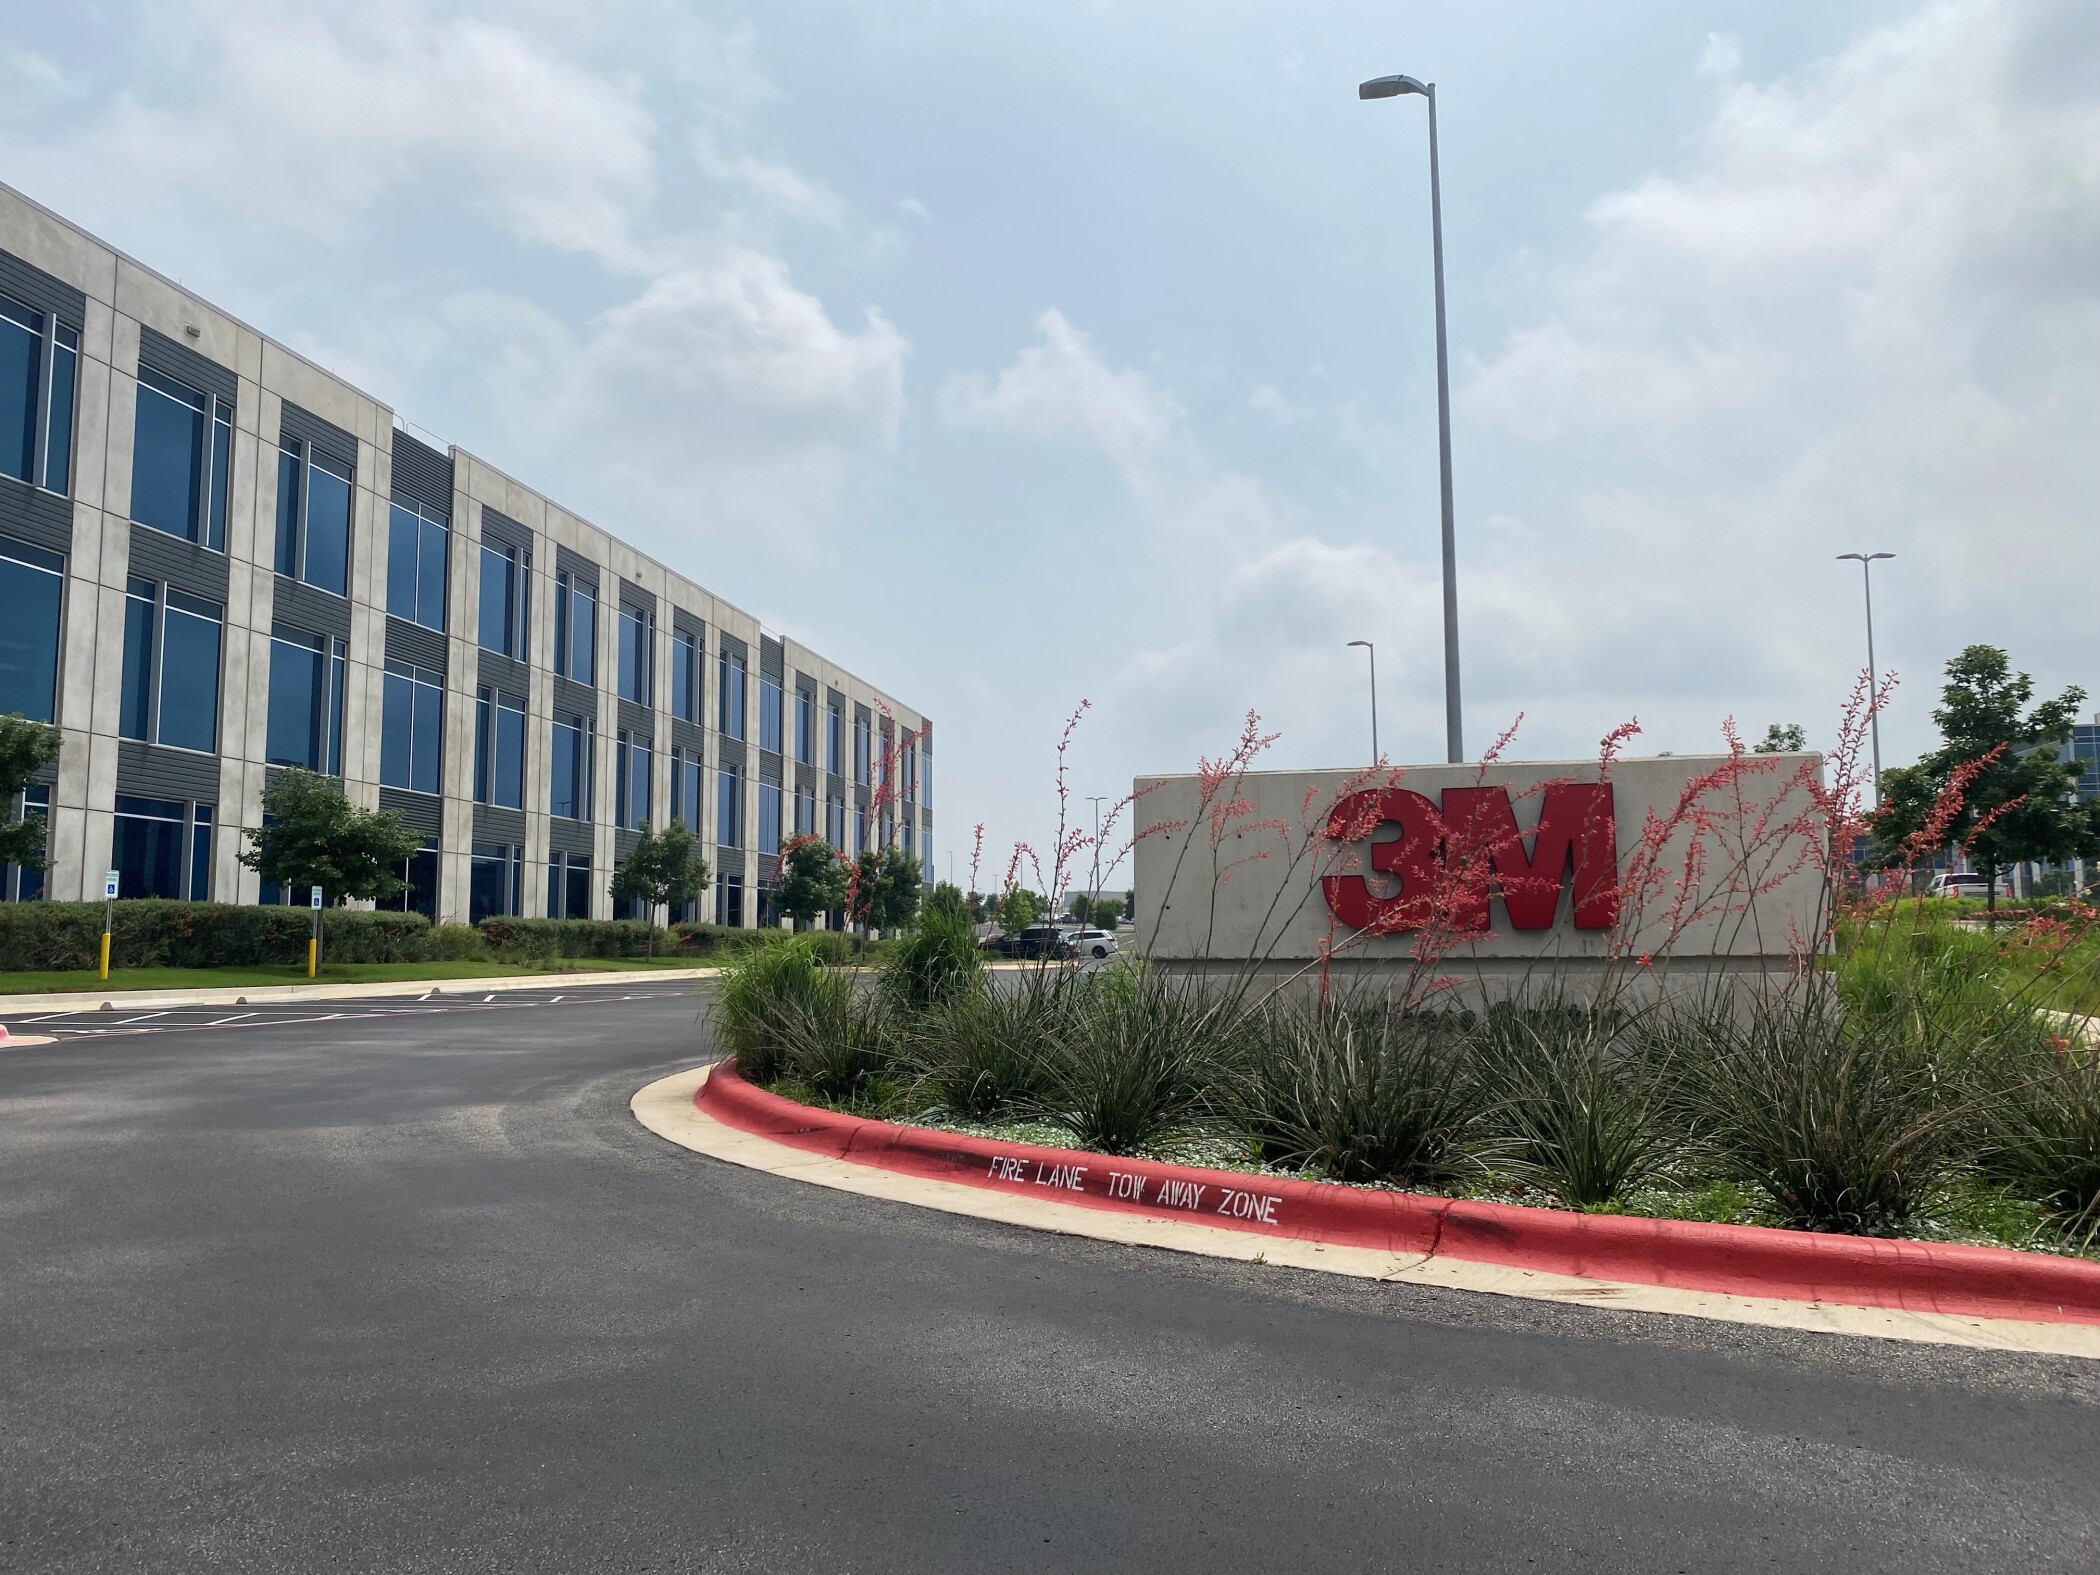 3M plans to sublease some of its office space in Austin, Texas. (Parimal M. Rohit/CoStar)